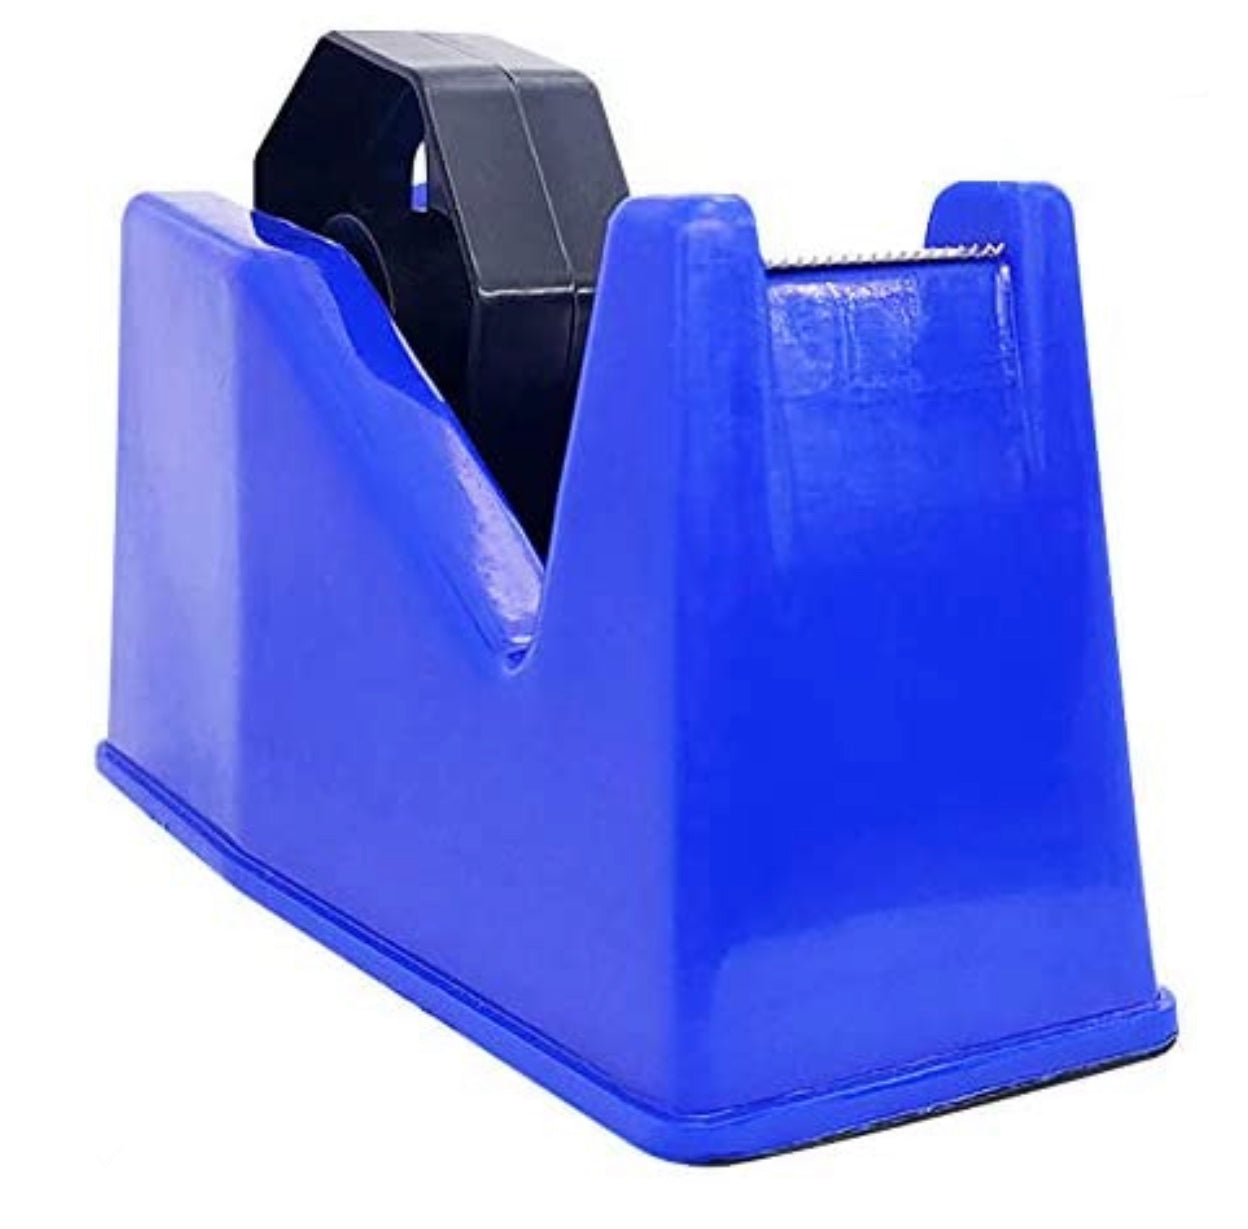 Sublimation Heat Tape Dispenser 6.3 x 2.5 x 3.4 Inch, Holder Fits 1 a – We  Sub'N